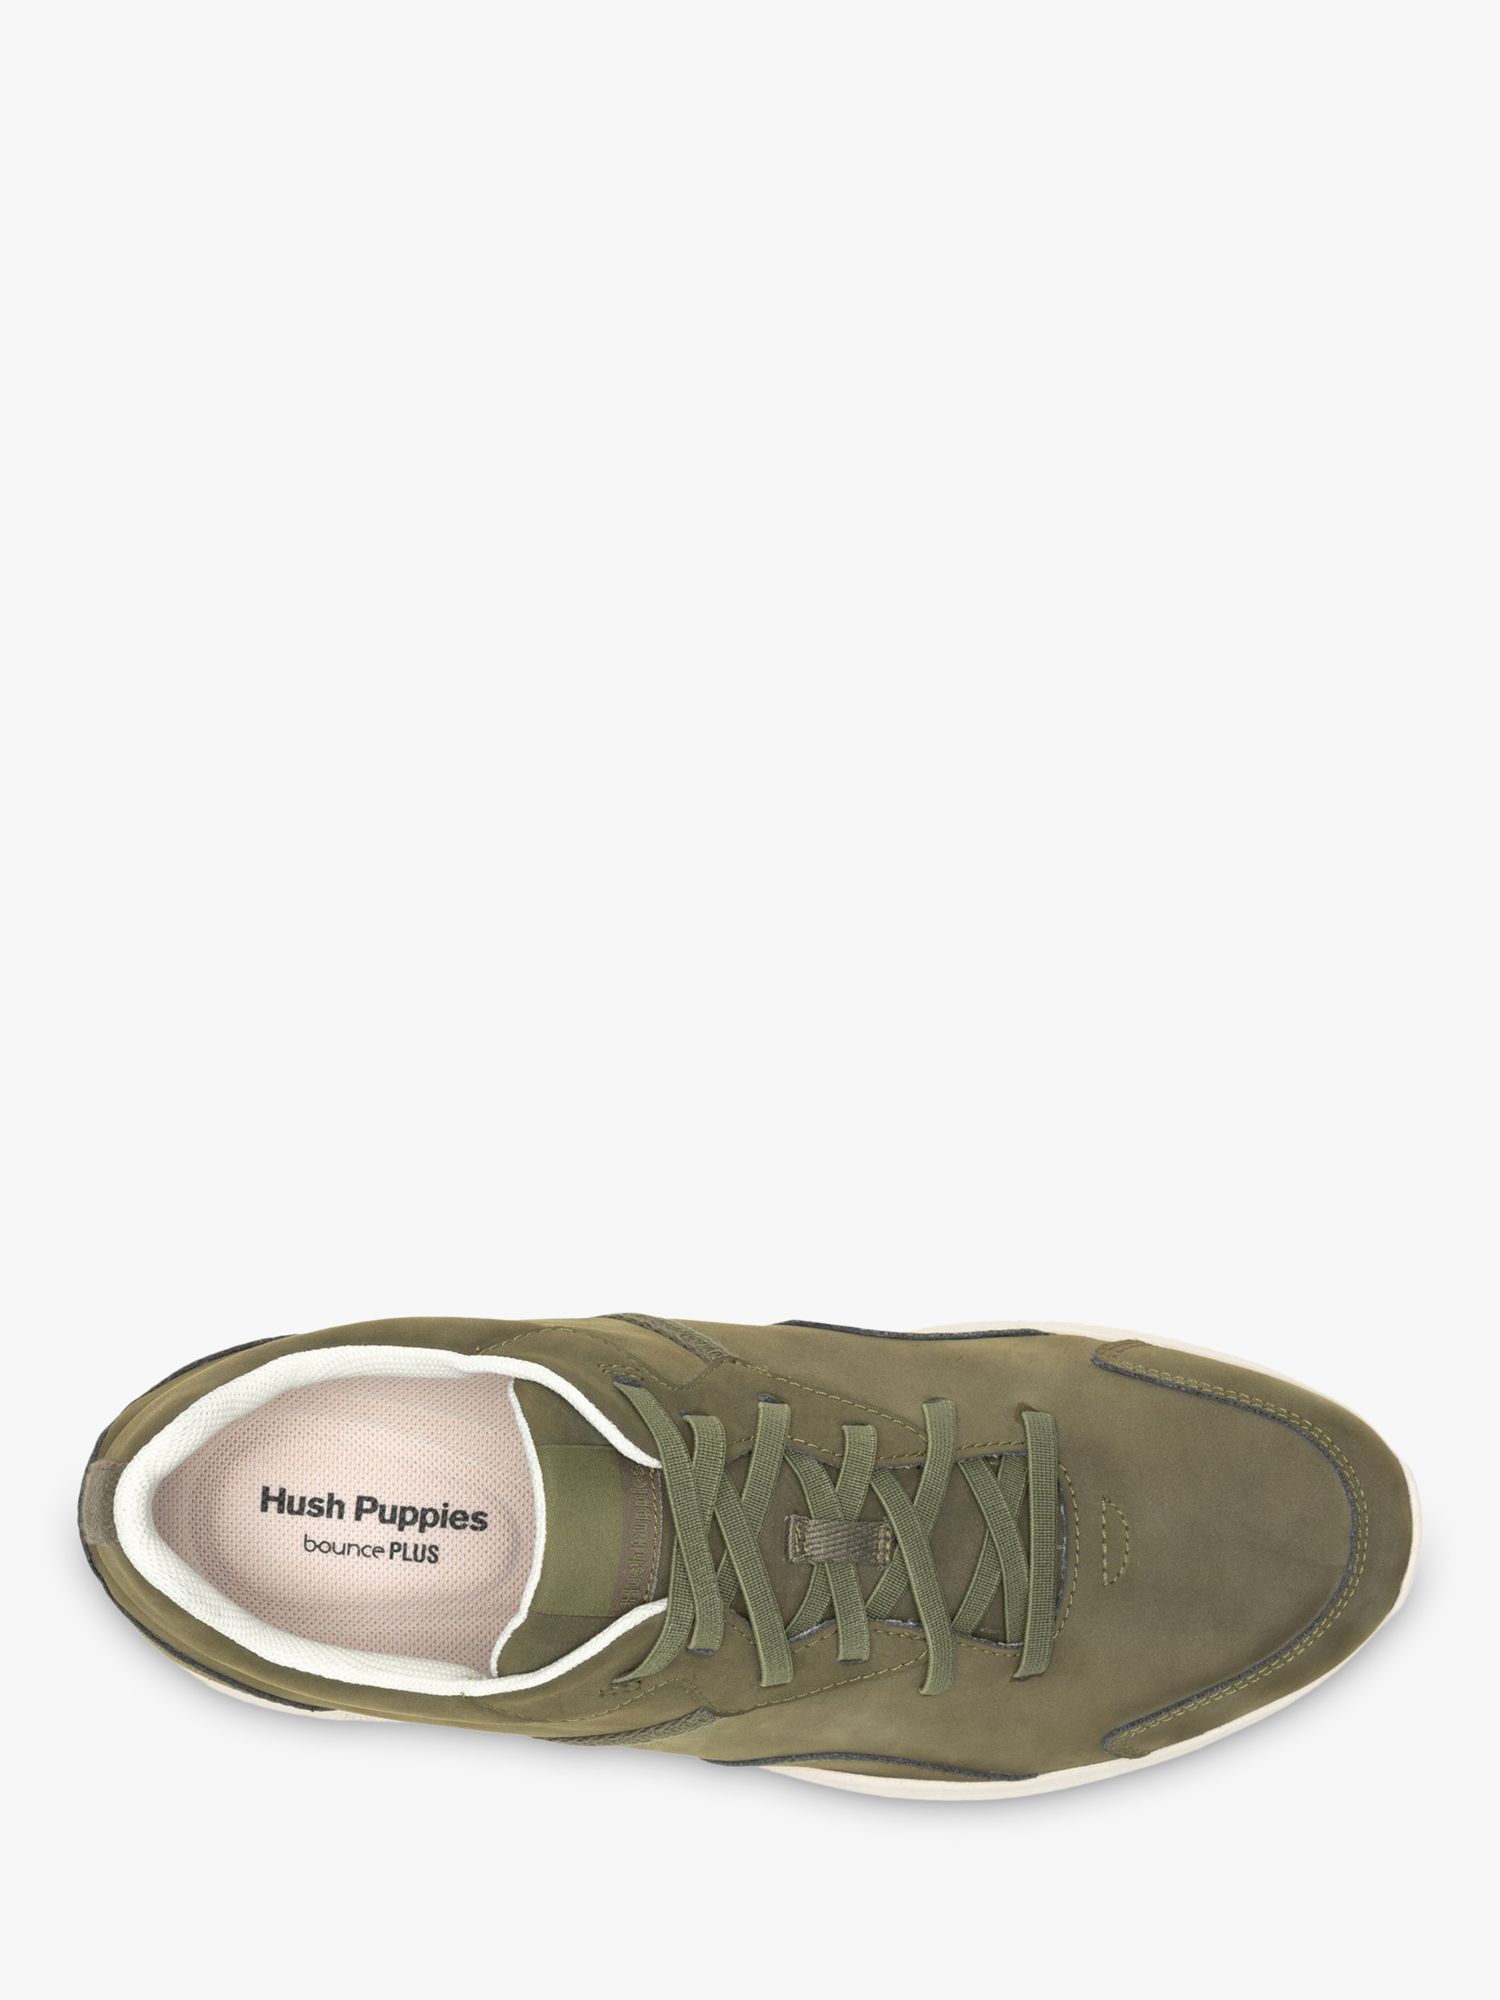 Hush Puppies The Good Trainers, Olive, 6